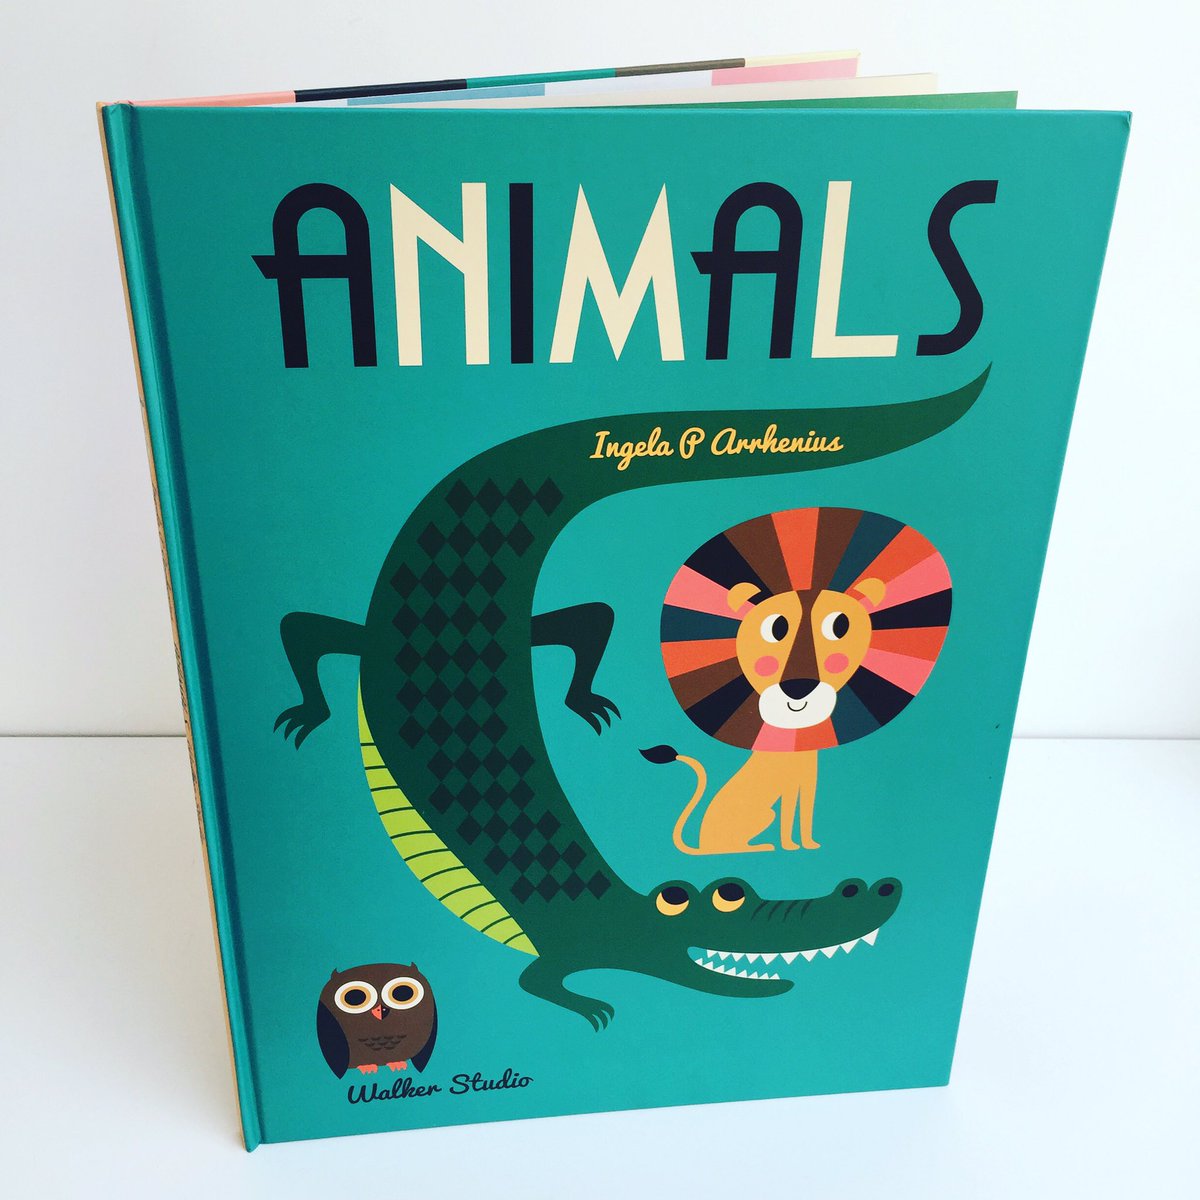 This is an over-sized, super-stylish look at animals, in a way that only #ingelaparrhenius can. Every page is a work of art!